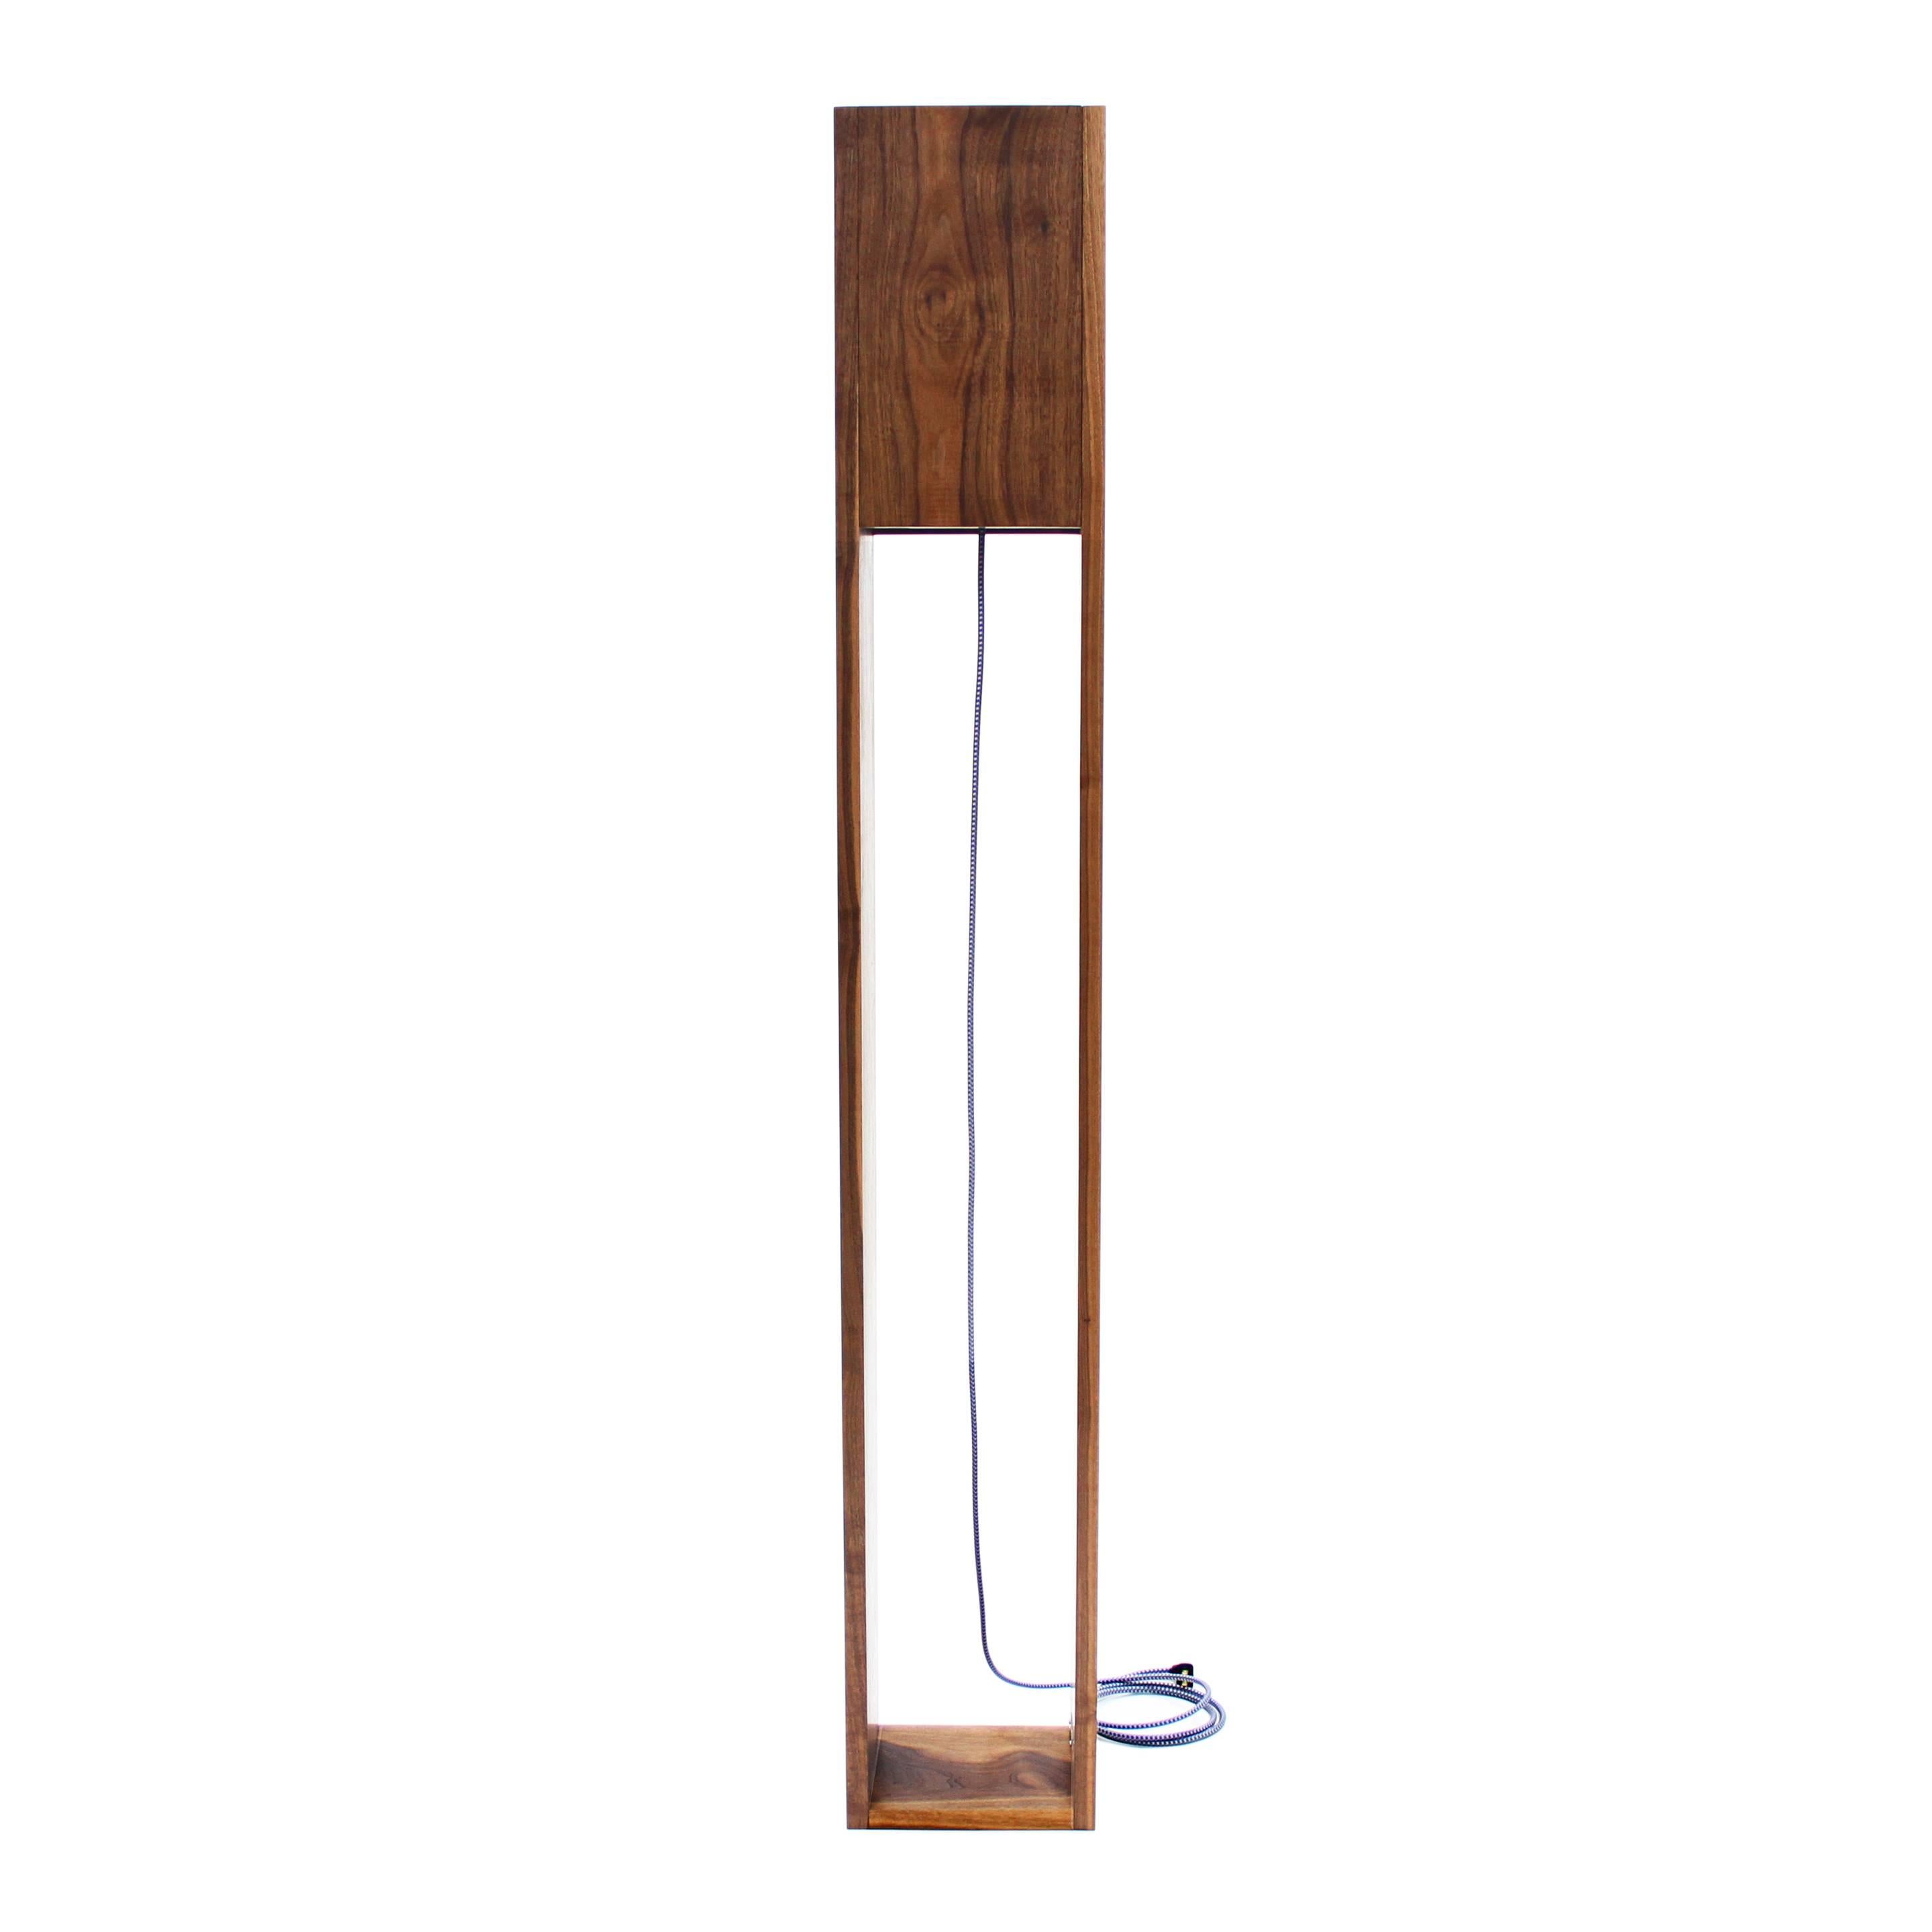 Monolith Floor Lamp in Solid Walnut Wood with Pull Chain and Cloth Cord